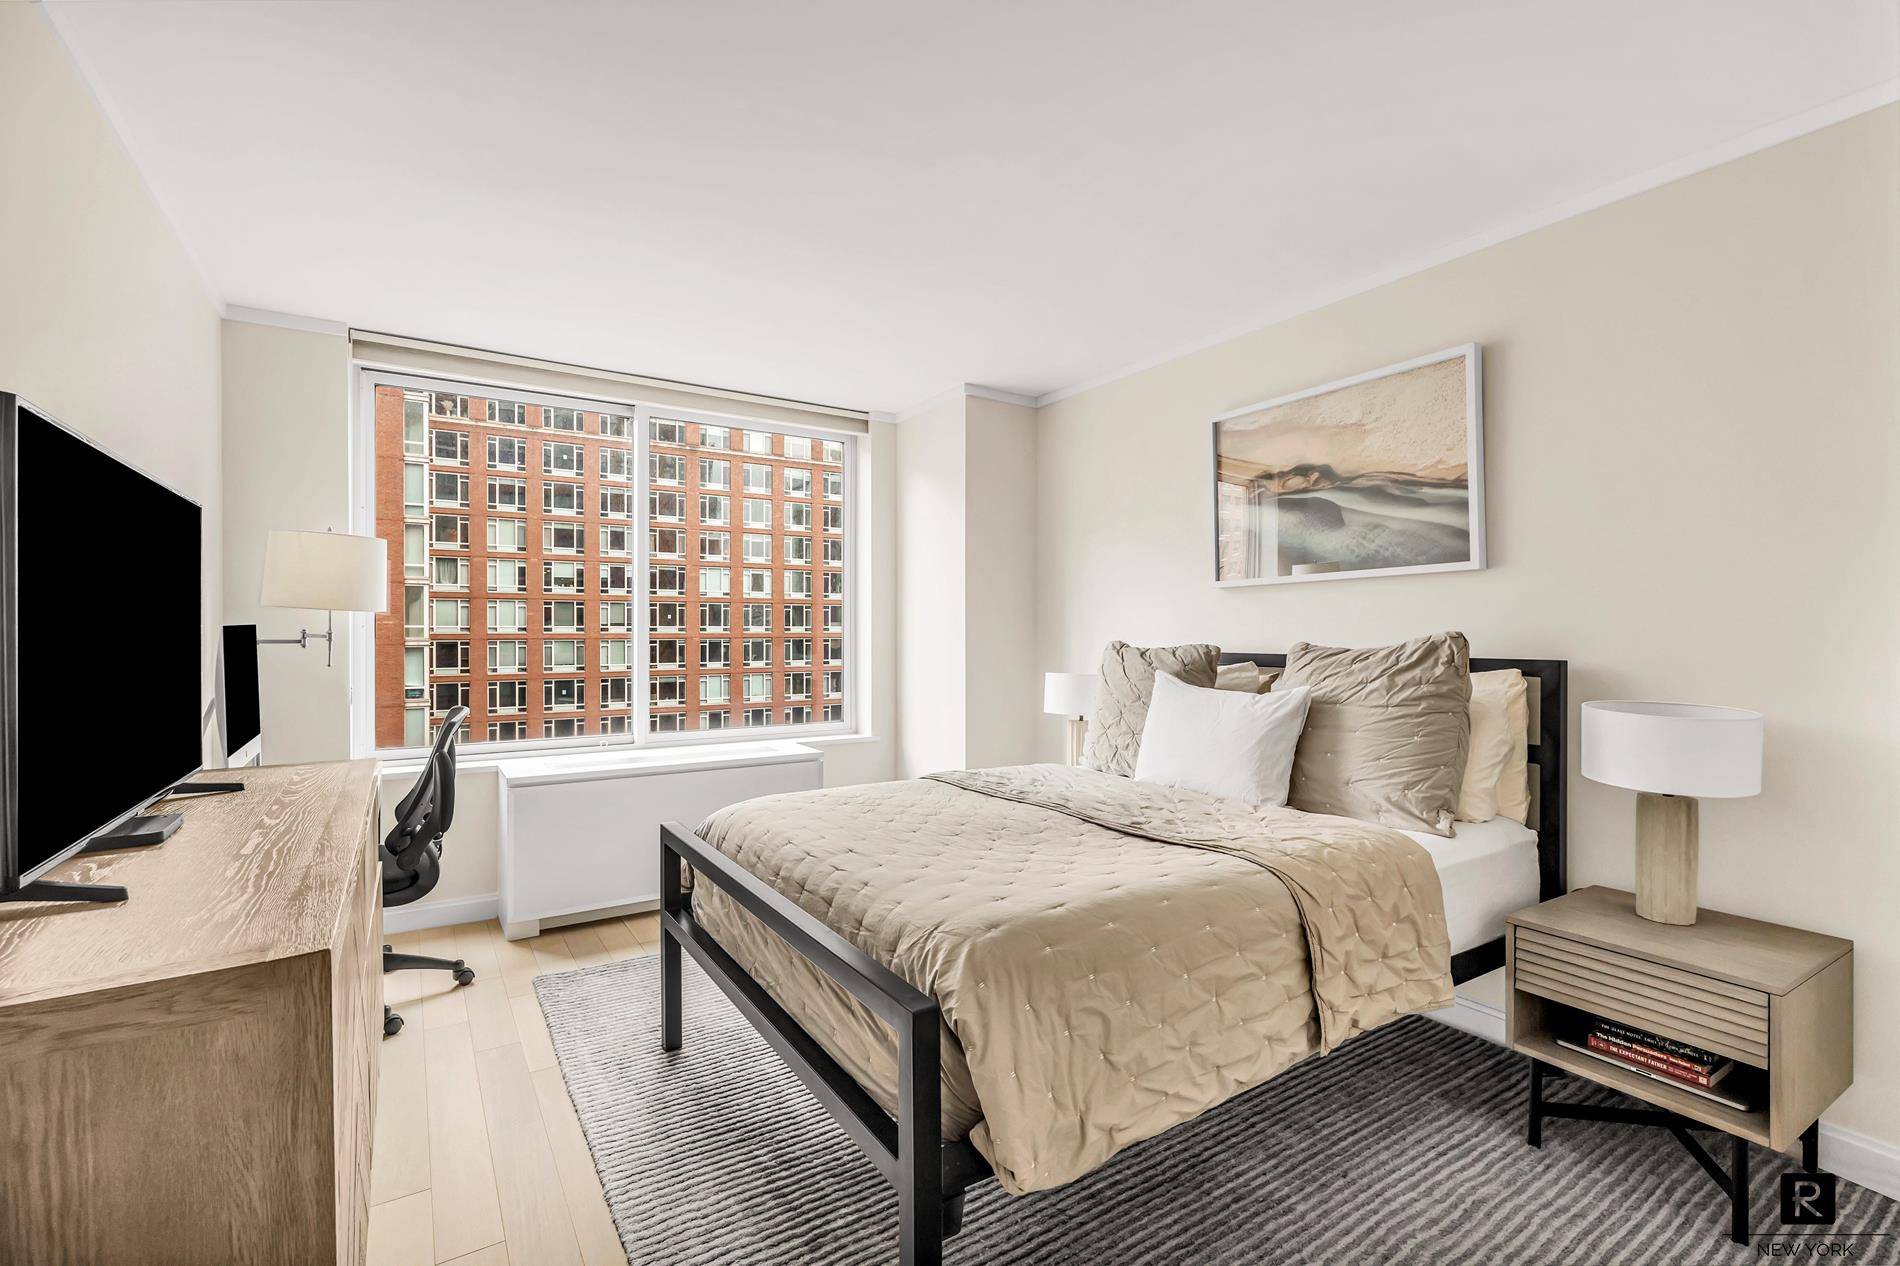 Welcome home to this quintessential split 2 bedroom 2 bathroom apartment located in 212 Warren St, one of only two true luxury condominium in North Battery Park West Tribeca.